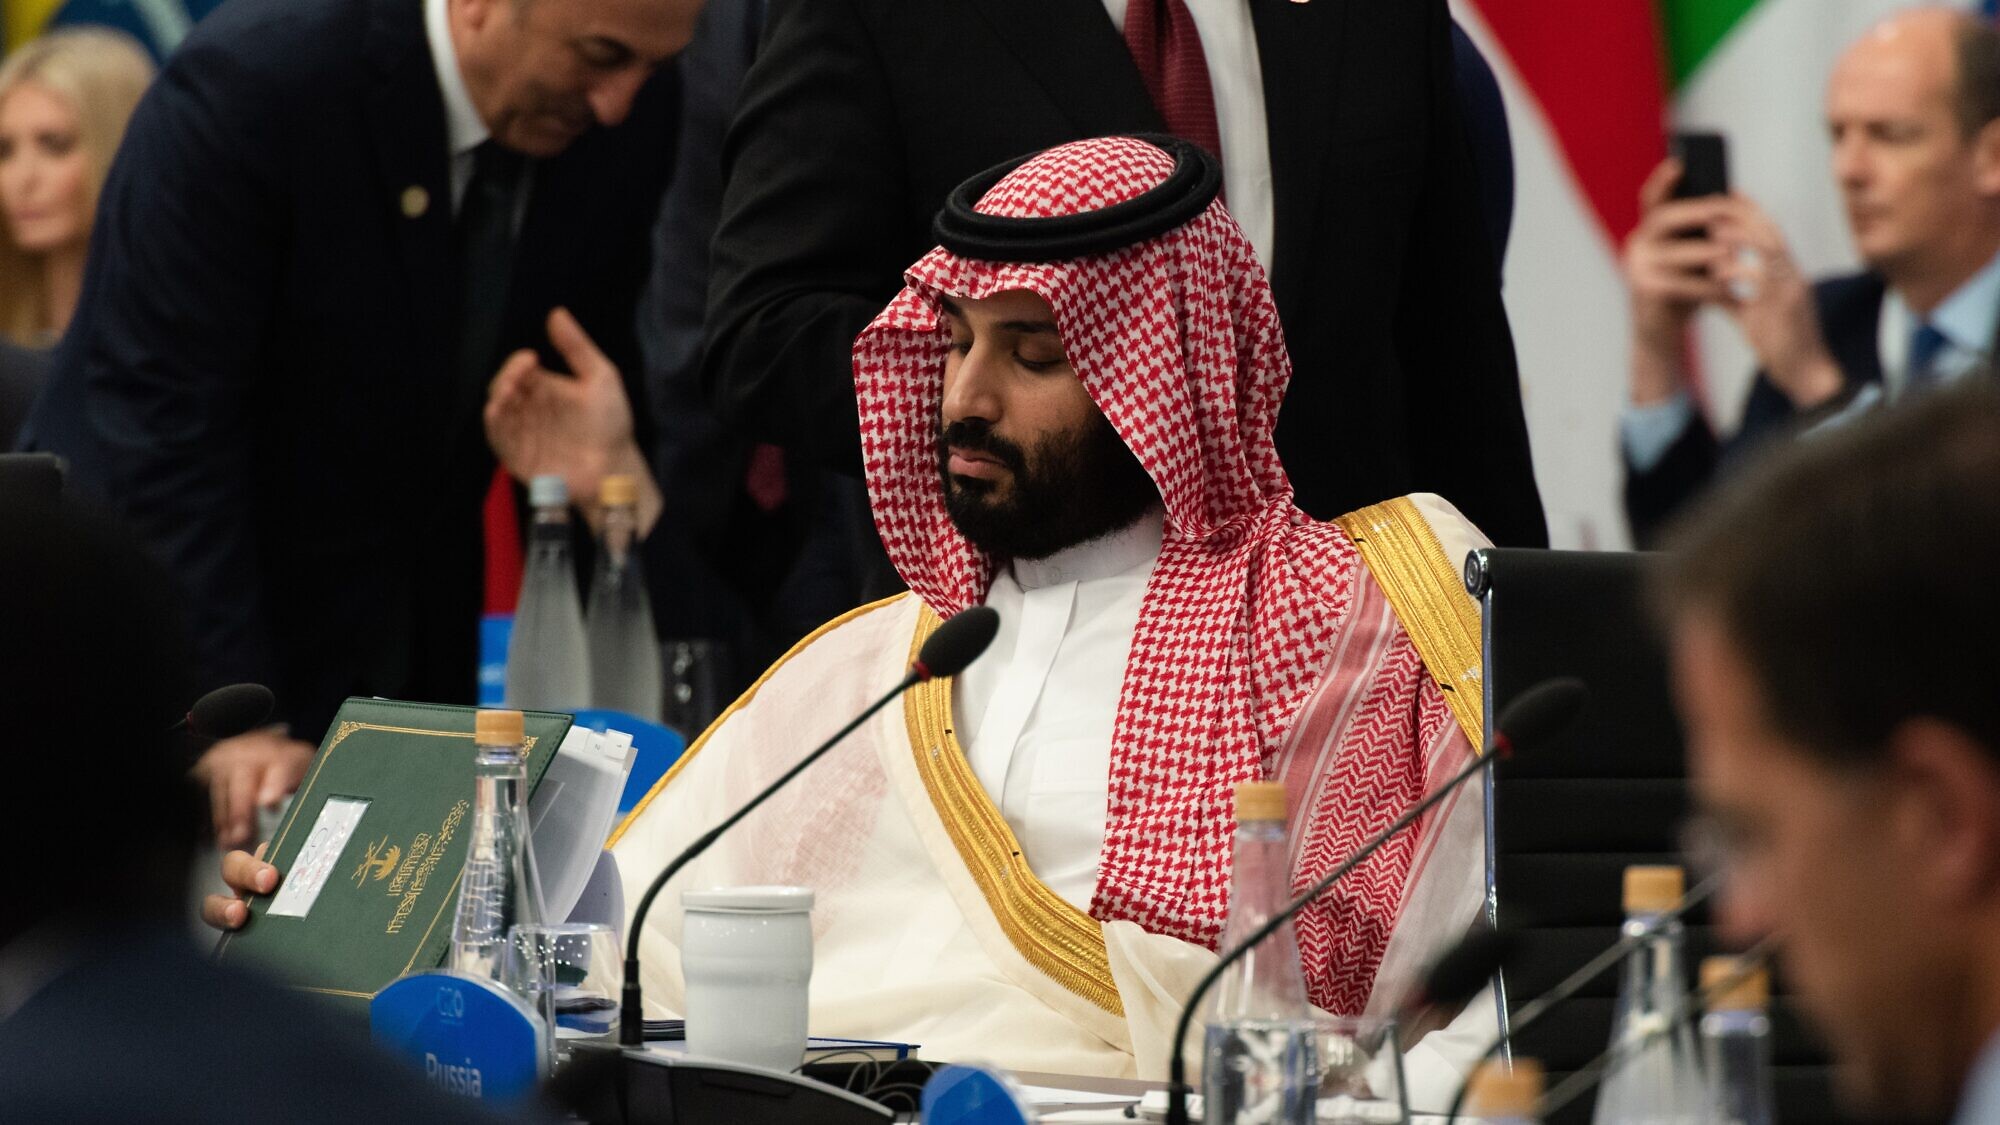 Saudi Crown Prince Mohammad bin Salman at the G20 meeting in Buenos Aires. Nov. 20, 2018. Photo by Matias Lynch/Shutterstock.